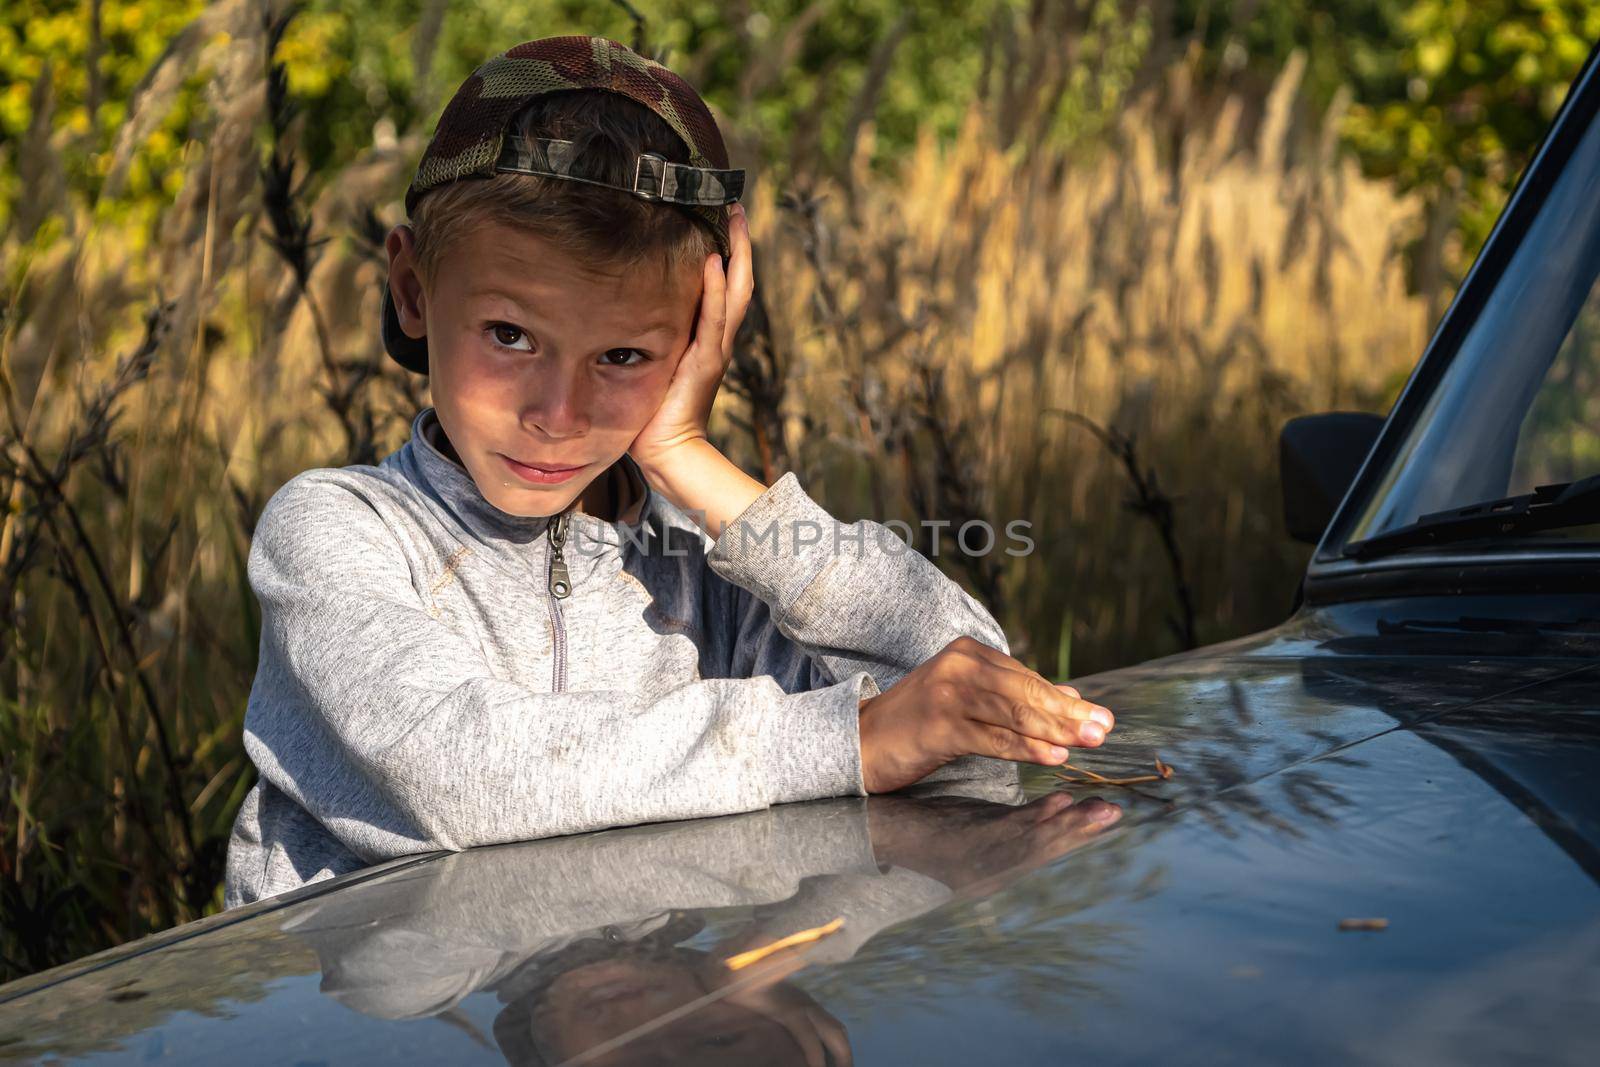 a cute six year old boy stands by the car against the background of autumn grass.. horizontal orientation.